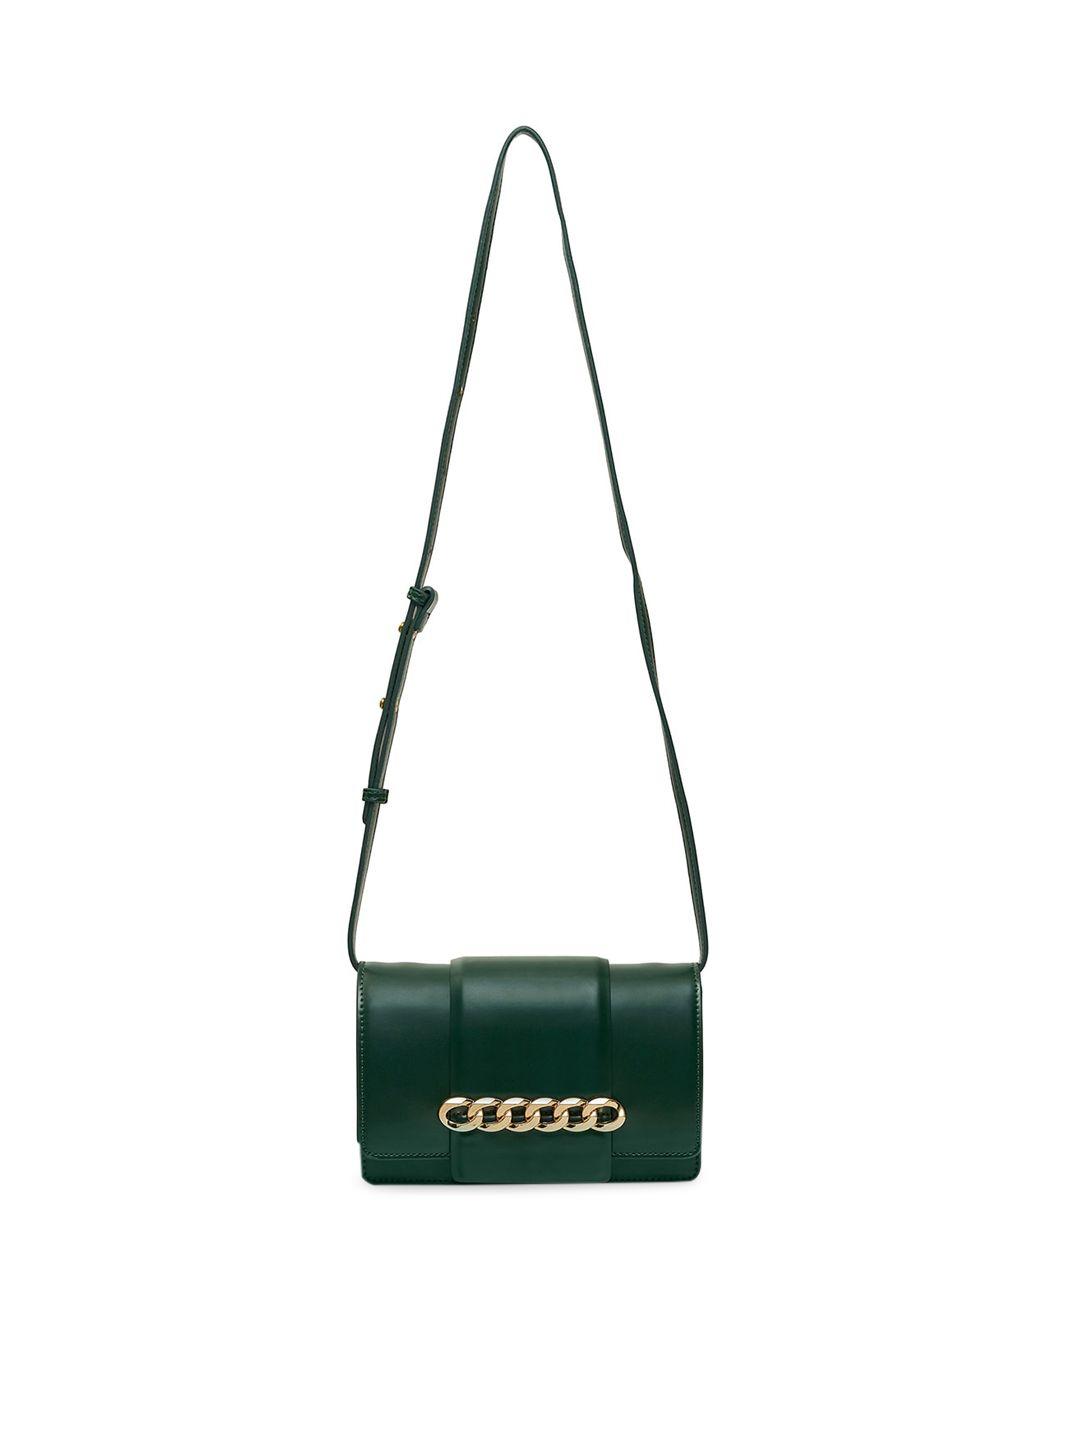 miraggio women solid green structured sling bag